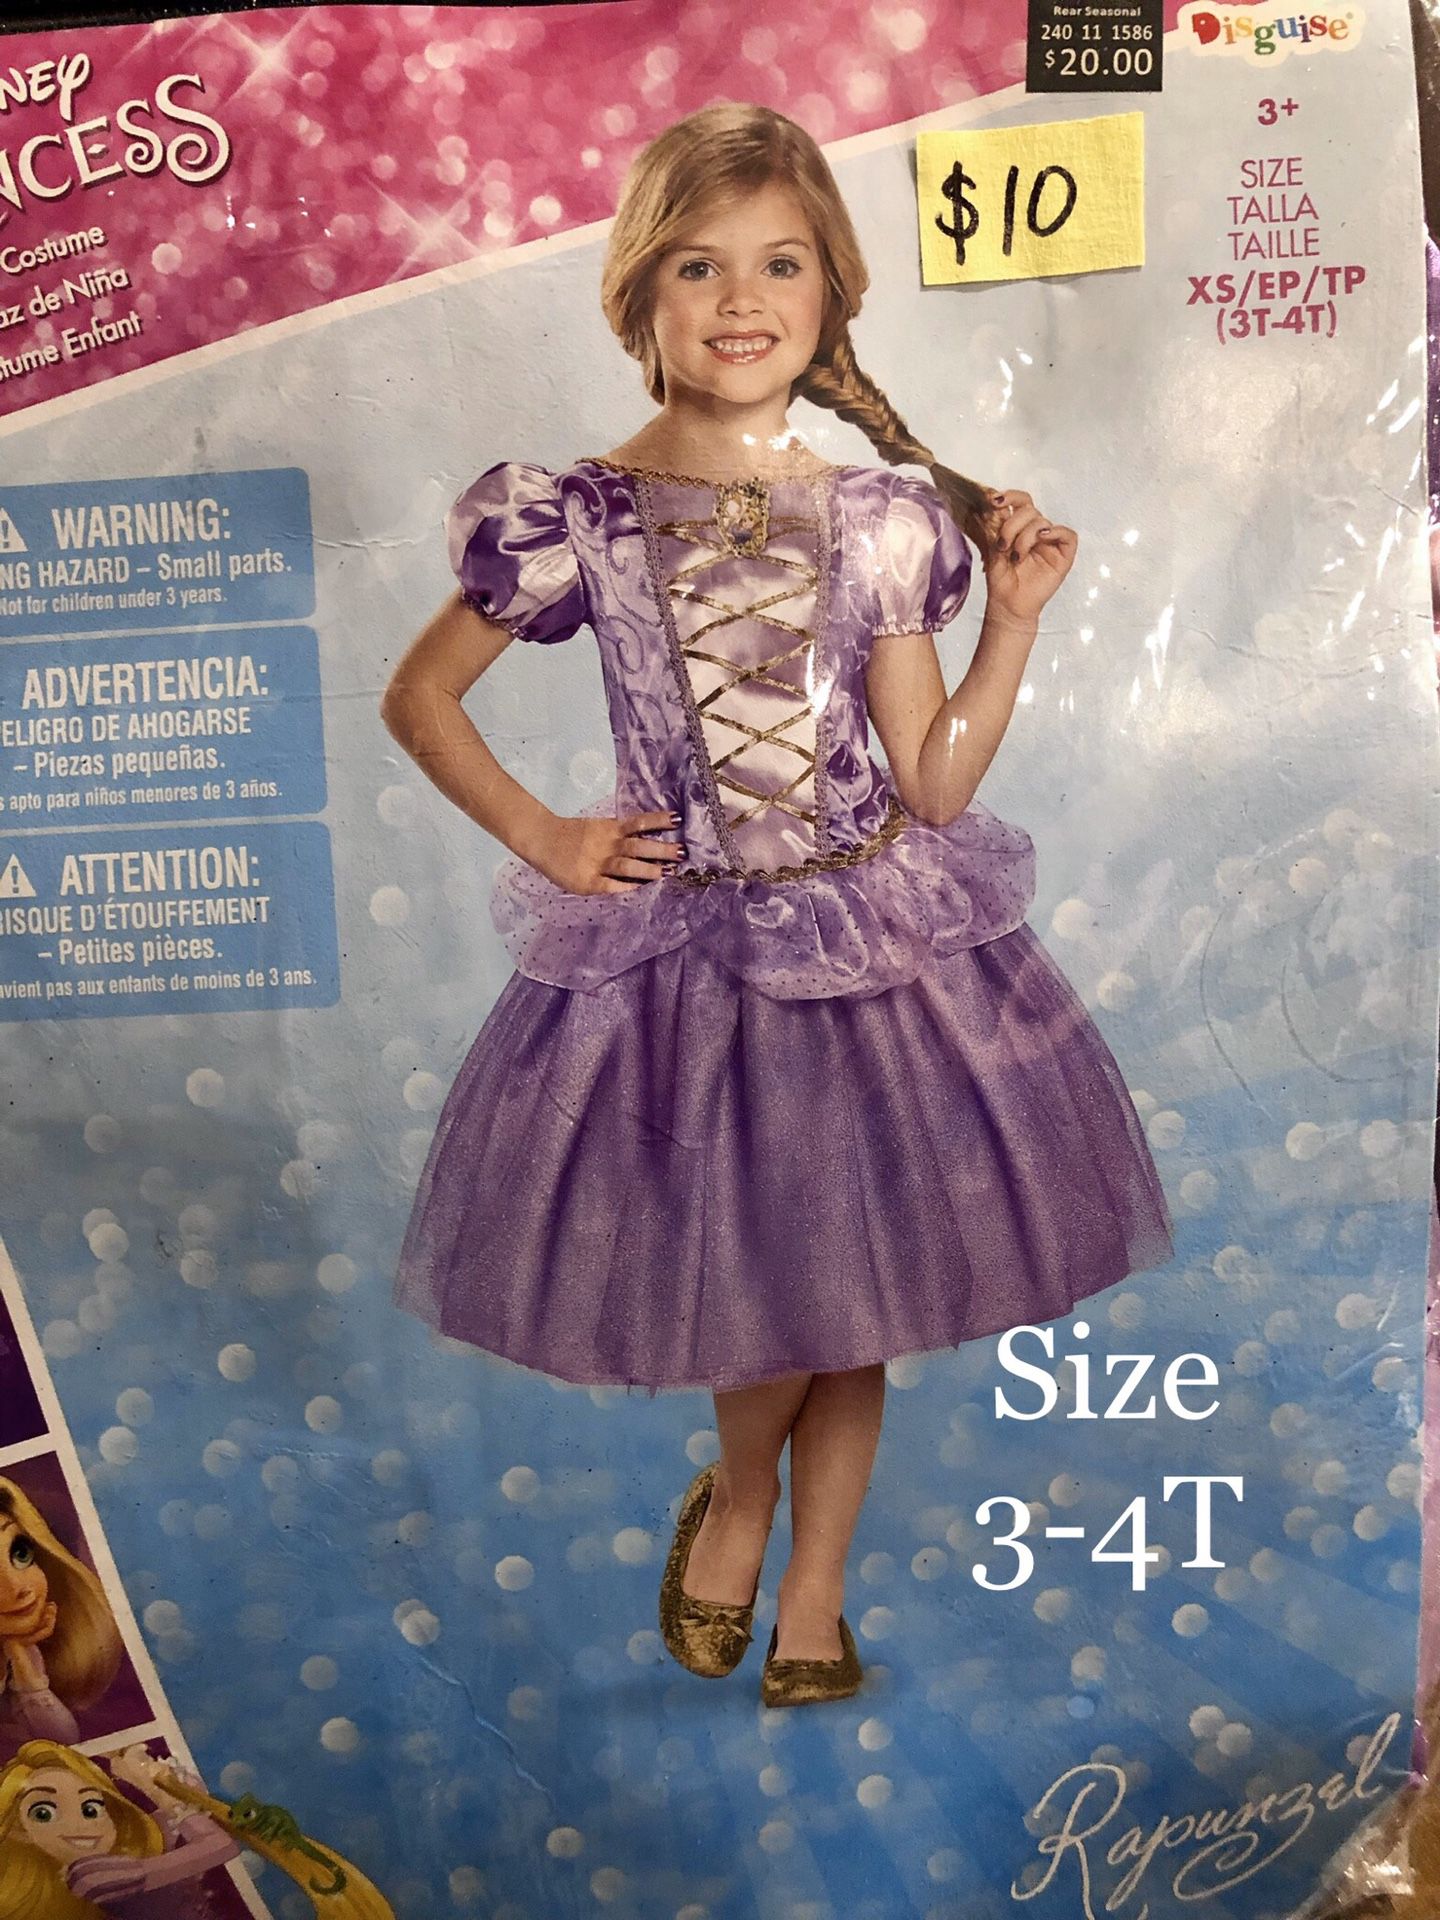 NEW Rapunzel Halloween Costume size Toddler 3-4T (LAST ONE!)